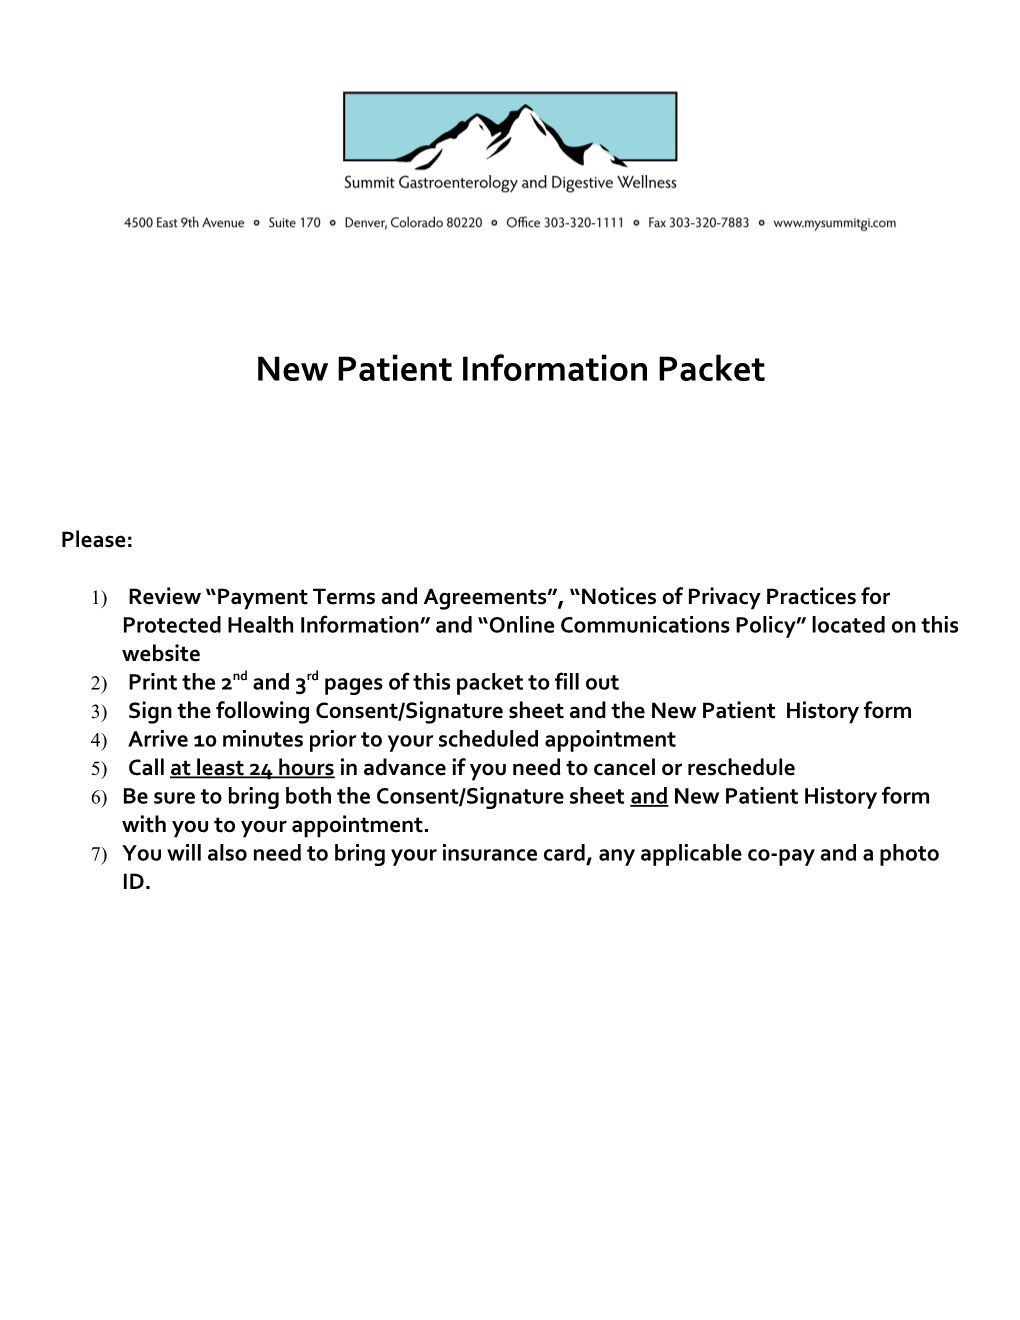 New Patient Information Packet